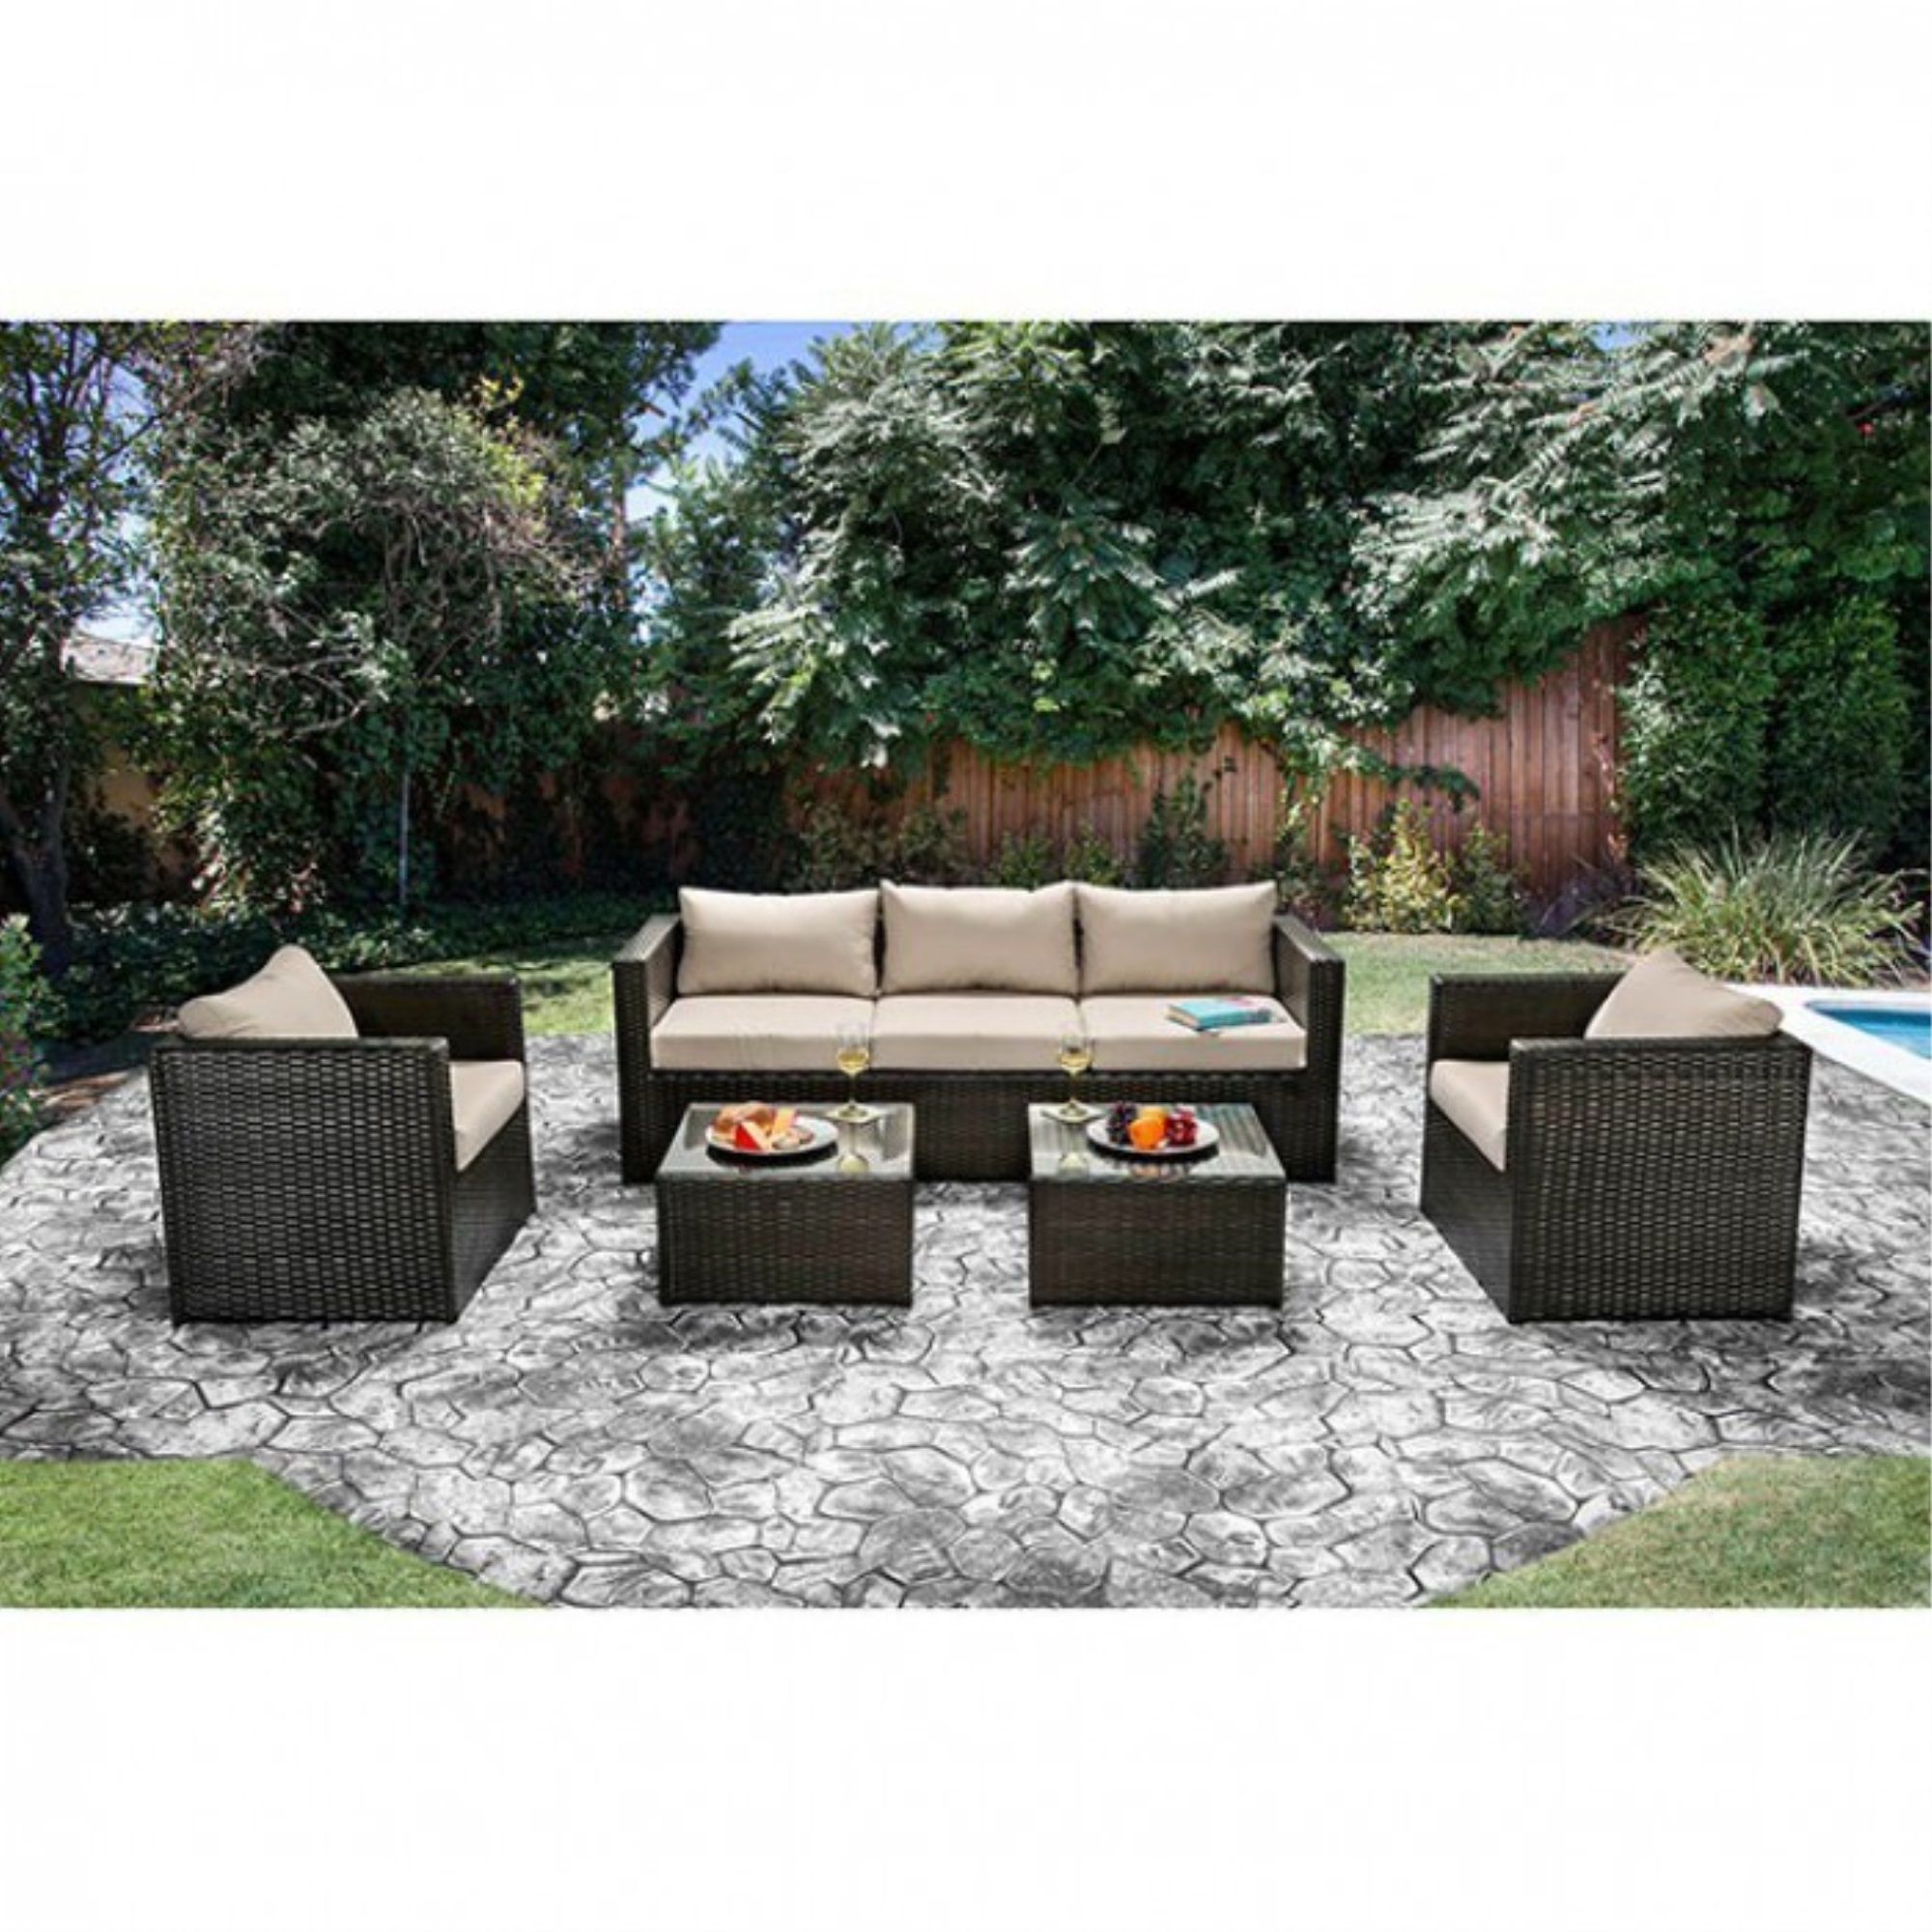 Winsome Contemporary Styled 5 Pc. Aluminum Patio Set, Ivory White/Espresso Brown - image 1 of 2